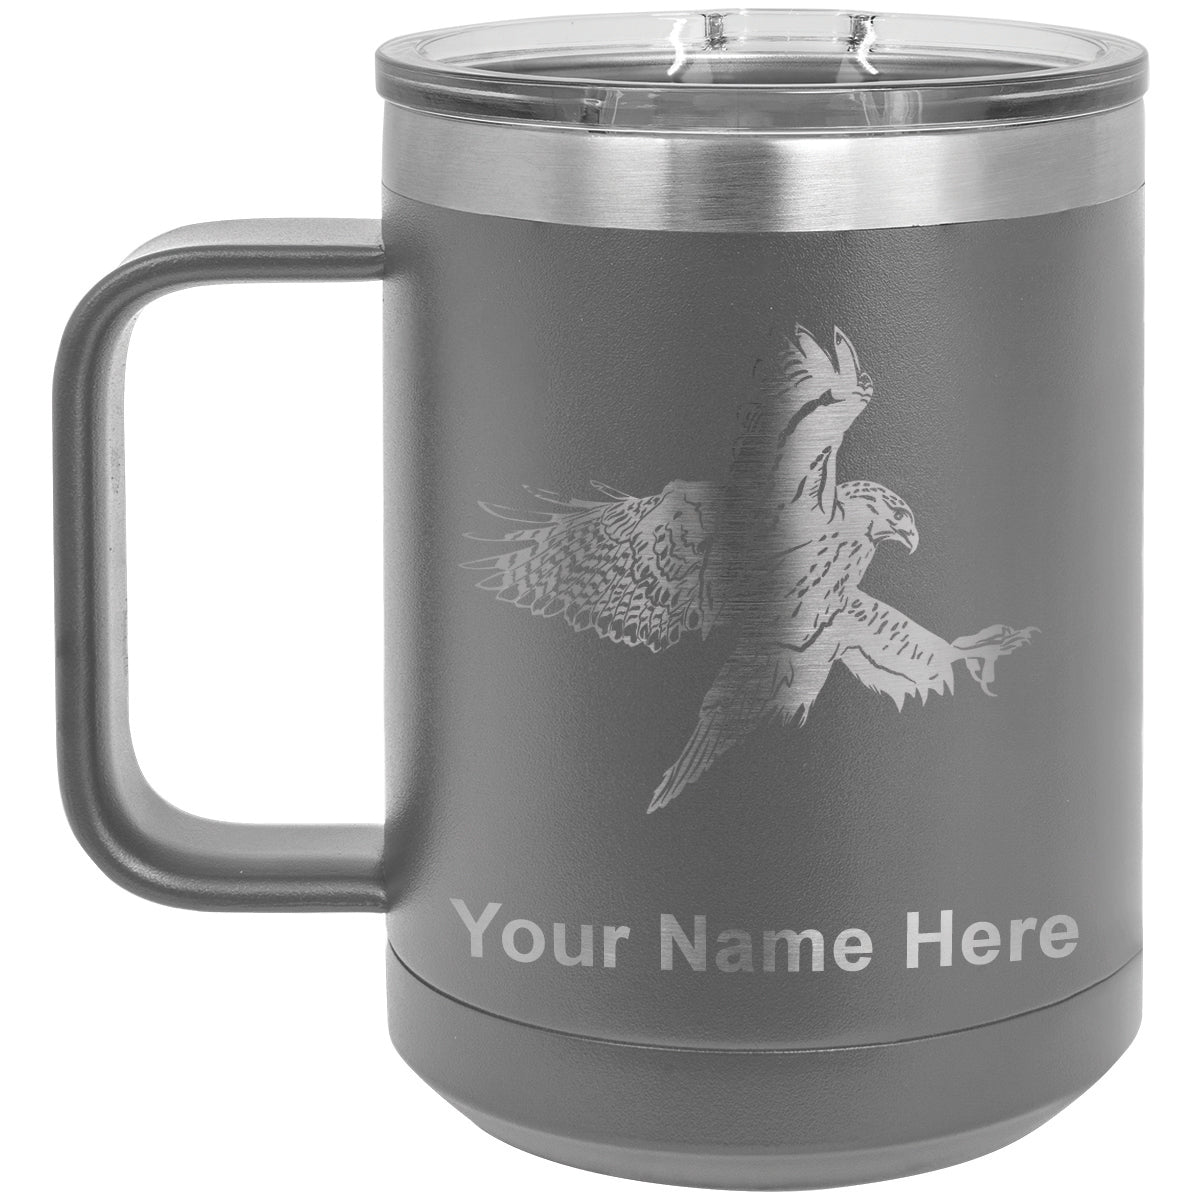 15oz Vacuum Insulated Coffee Mug, Hawk, Personalized Engraving Included